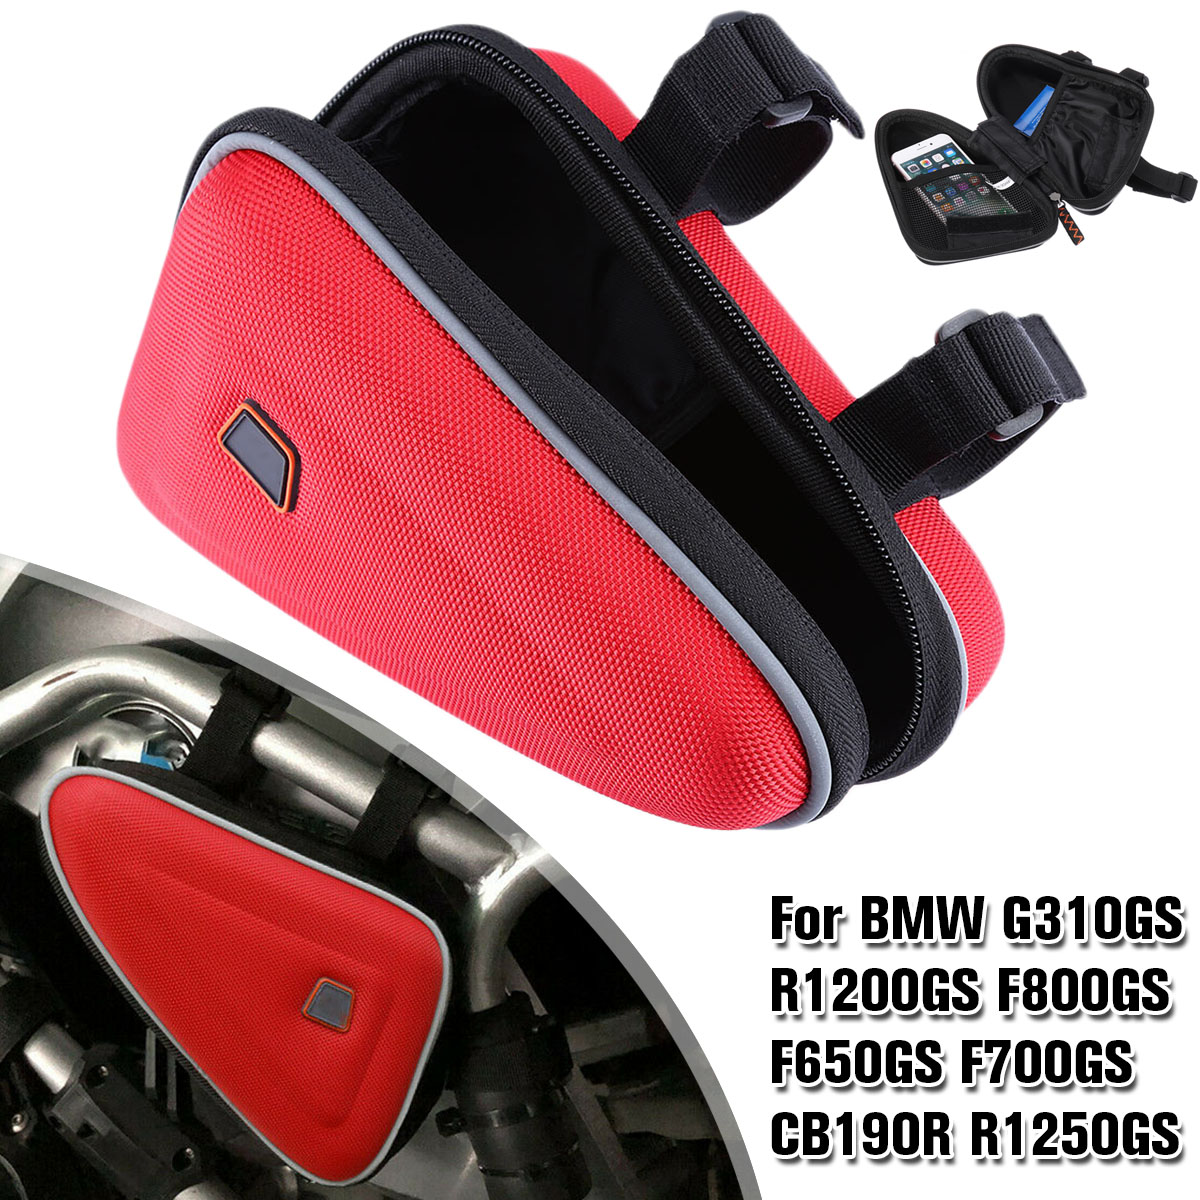 Red Motorcycle Frame Storage Bag Small Kit For BMW R1200GS F800GS F650GS F700GS 